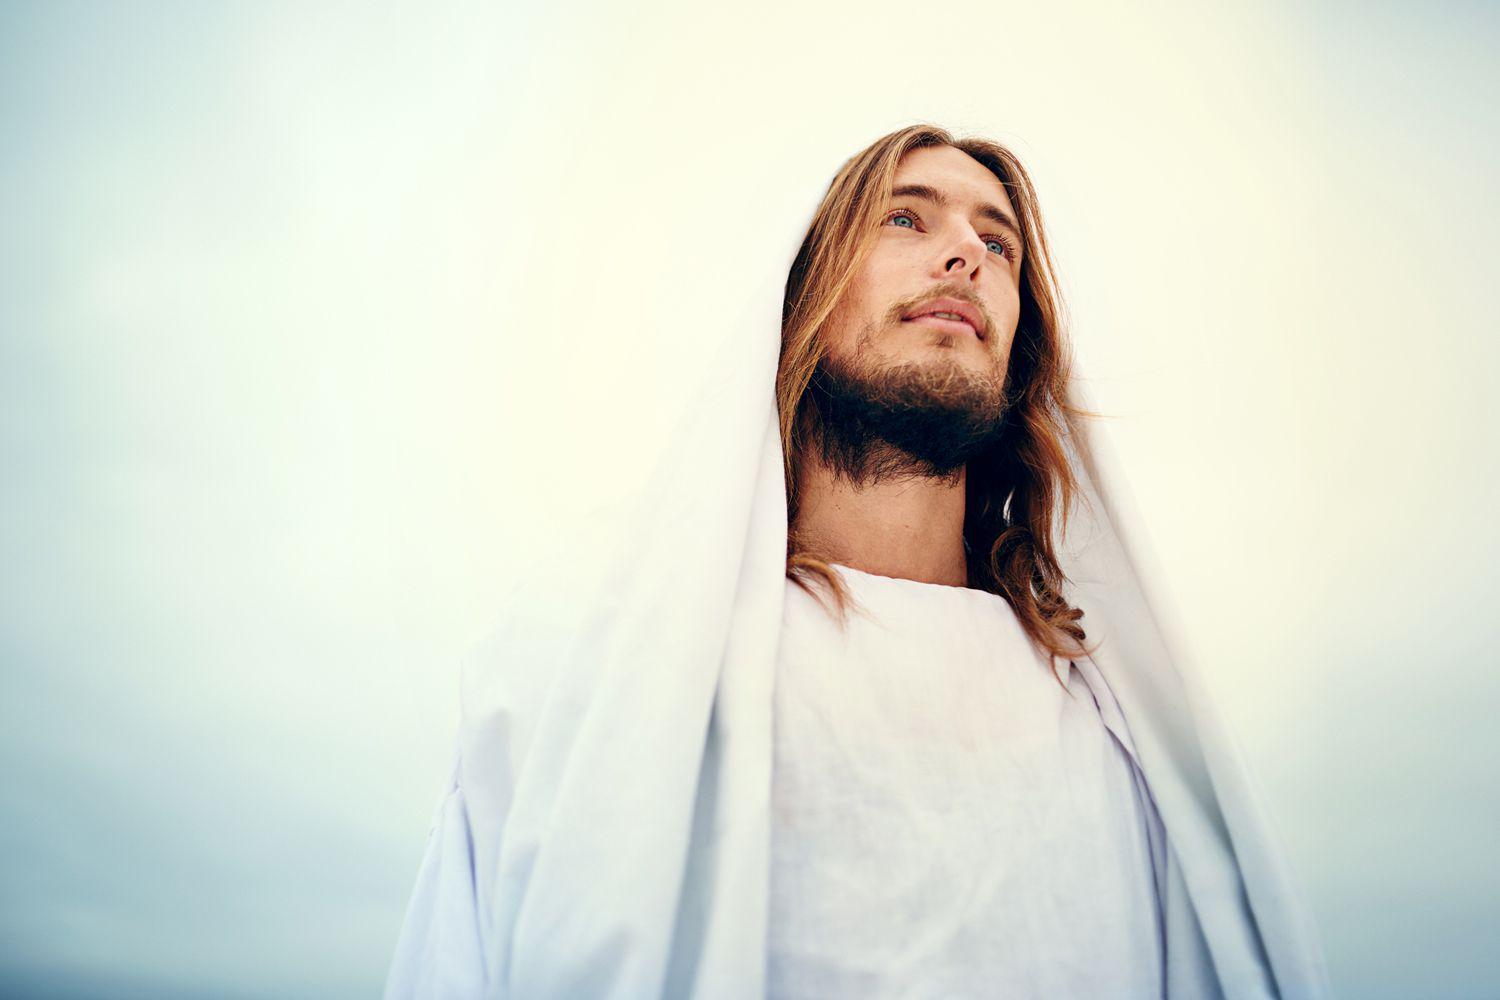 Who Is Jesus Christ? The Central Figure in Christianity